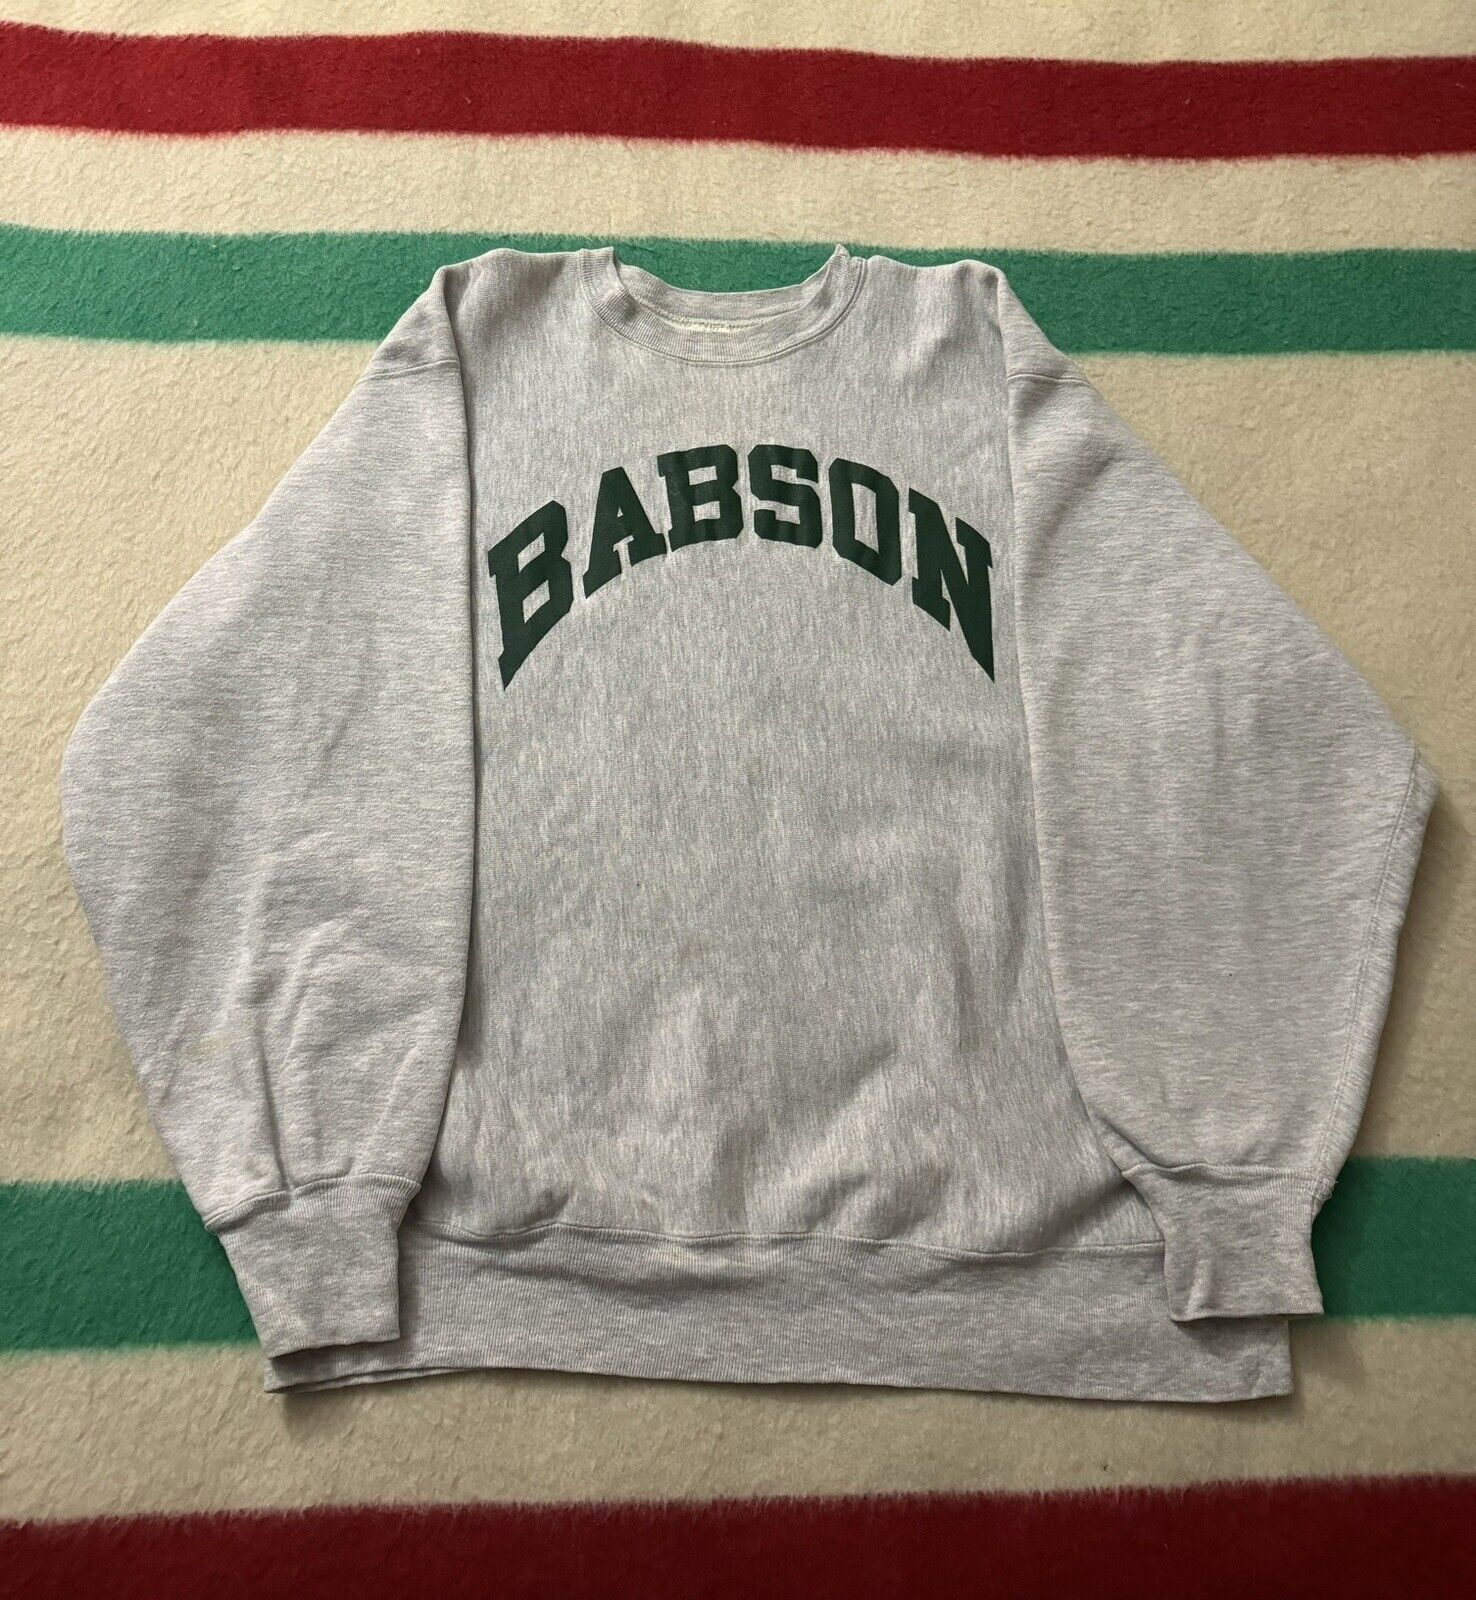 Vintage 80s 90s Champion Reverse Weave Babson Sweater Large L Ivy League Mass MA